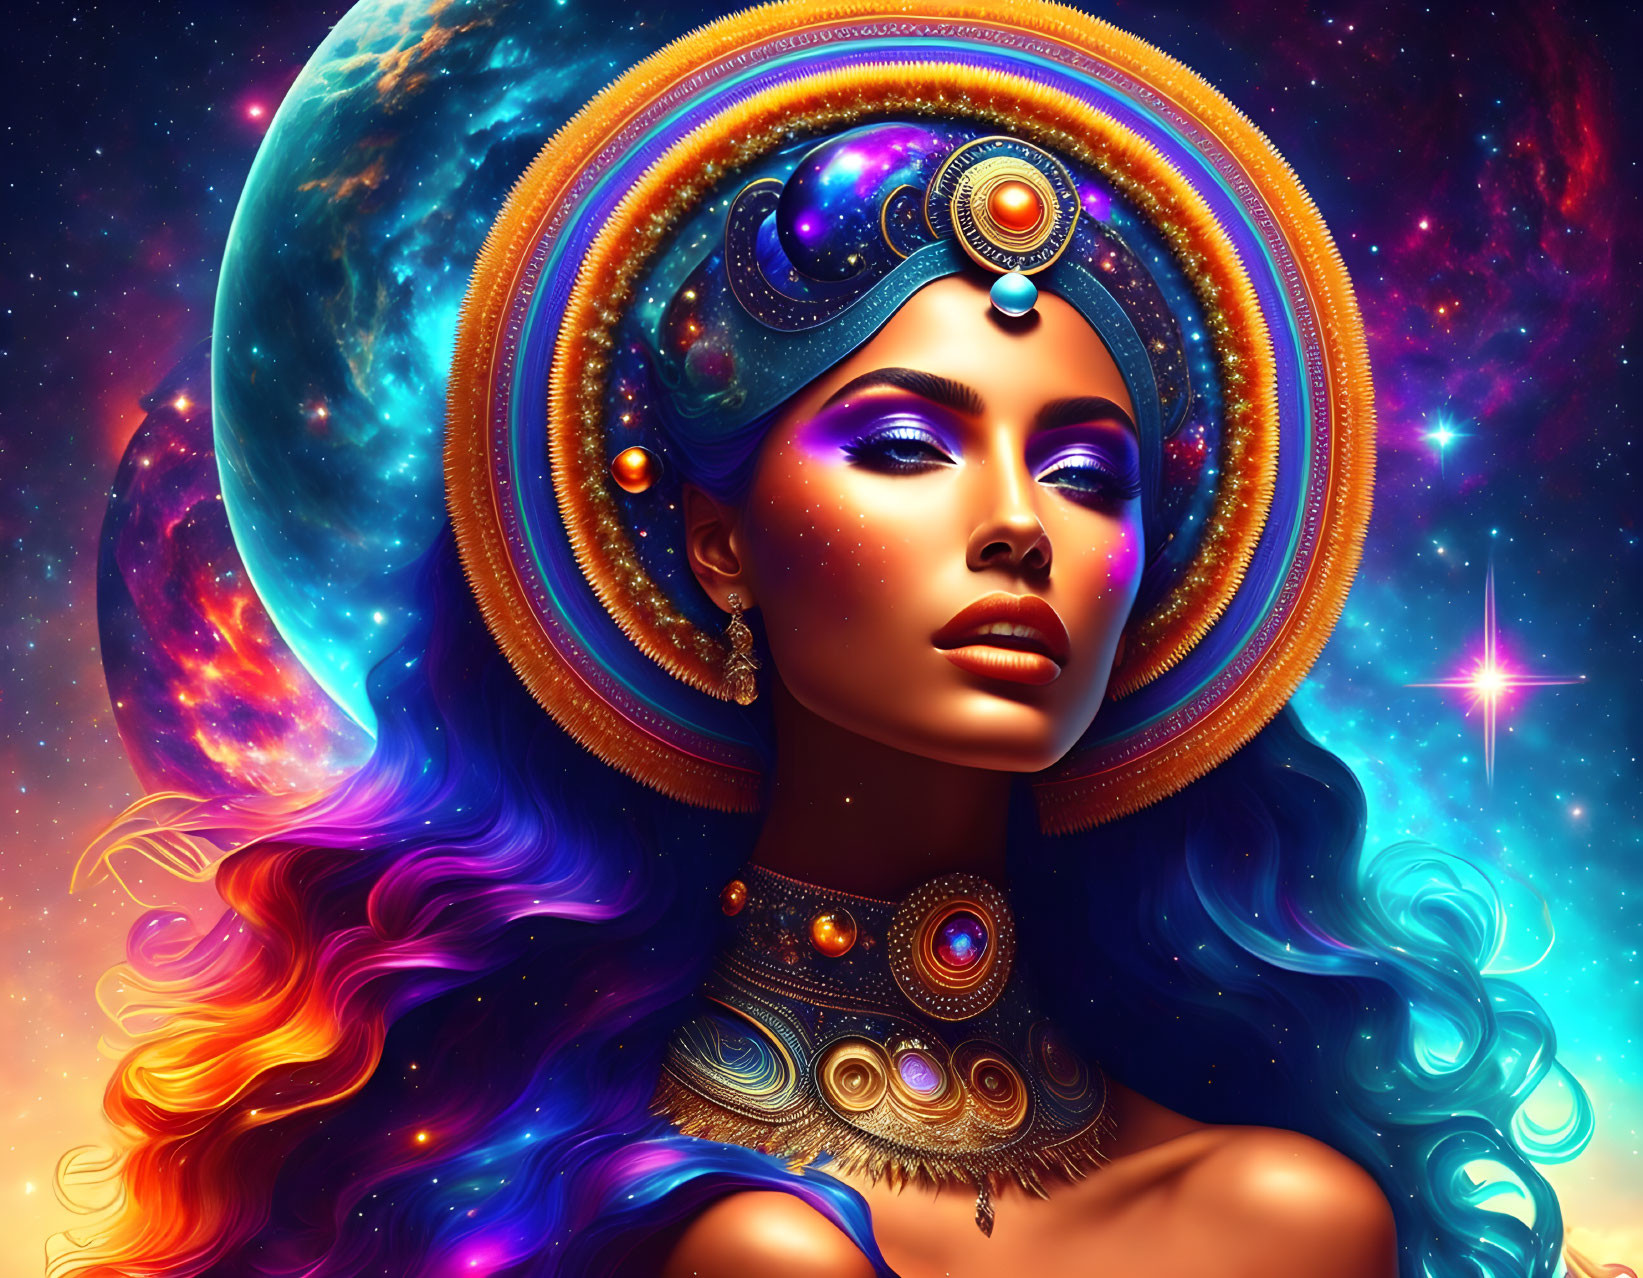 Colorful digital art: Woman with cosmic headdress, multicolored hair, and jewelry in space